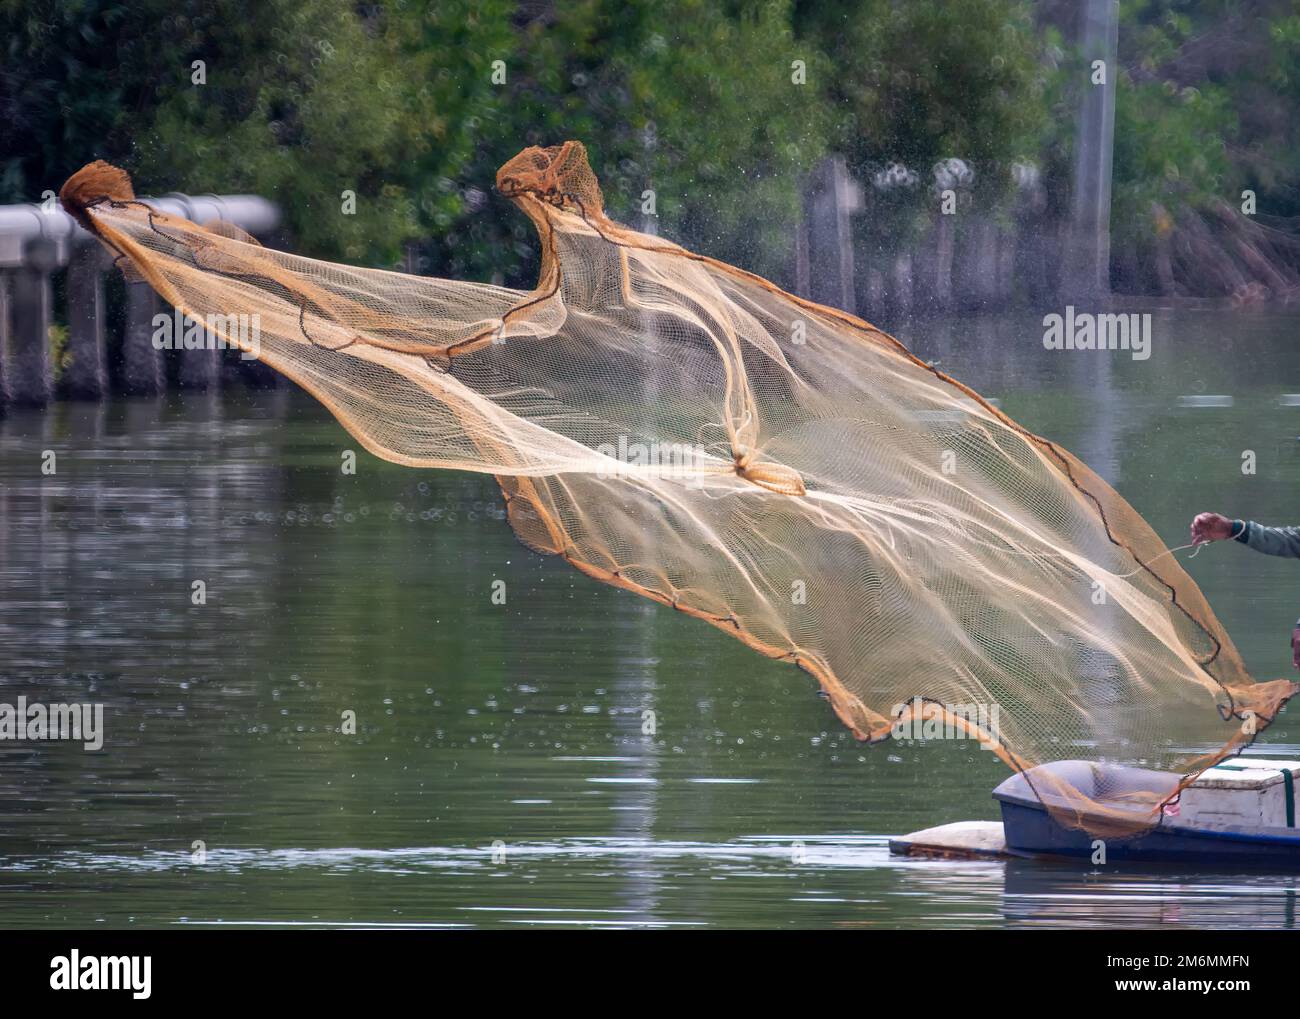 The net that was thrown out Hoping to catch fish in the canal Stock Photo